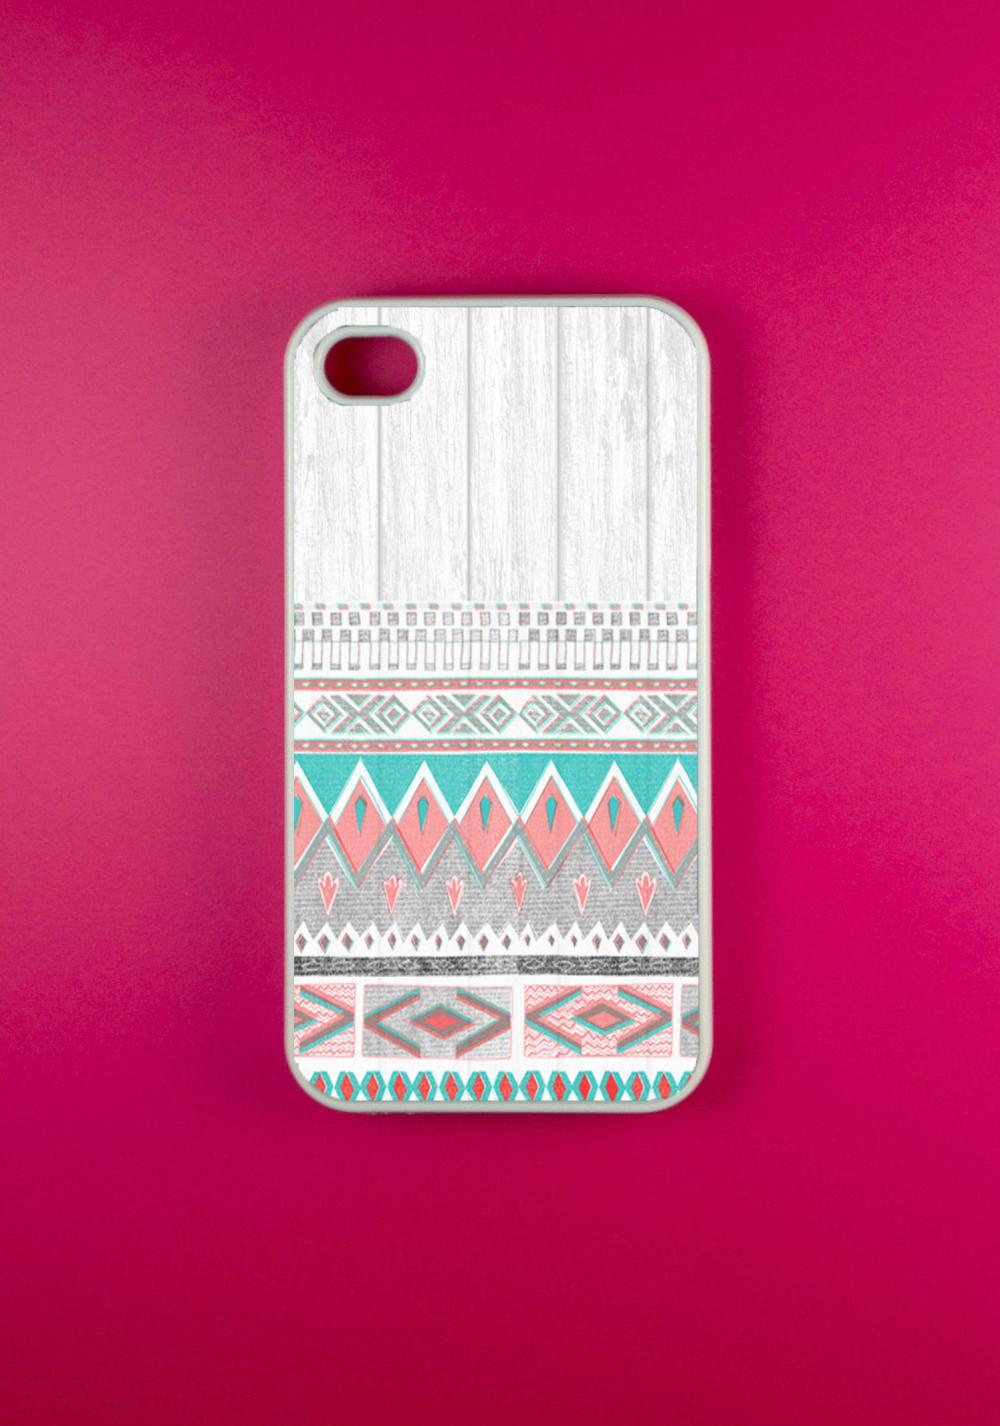 Iphone 4 Case - Aztec Pattern Iphone 4s Case, Iphone Case, Iphone 4 Cover